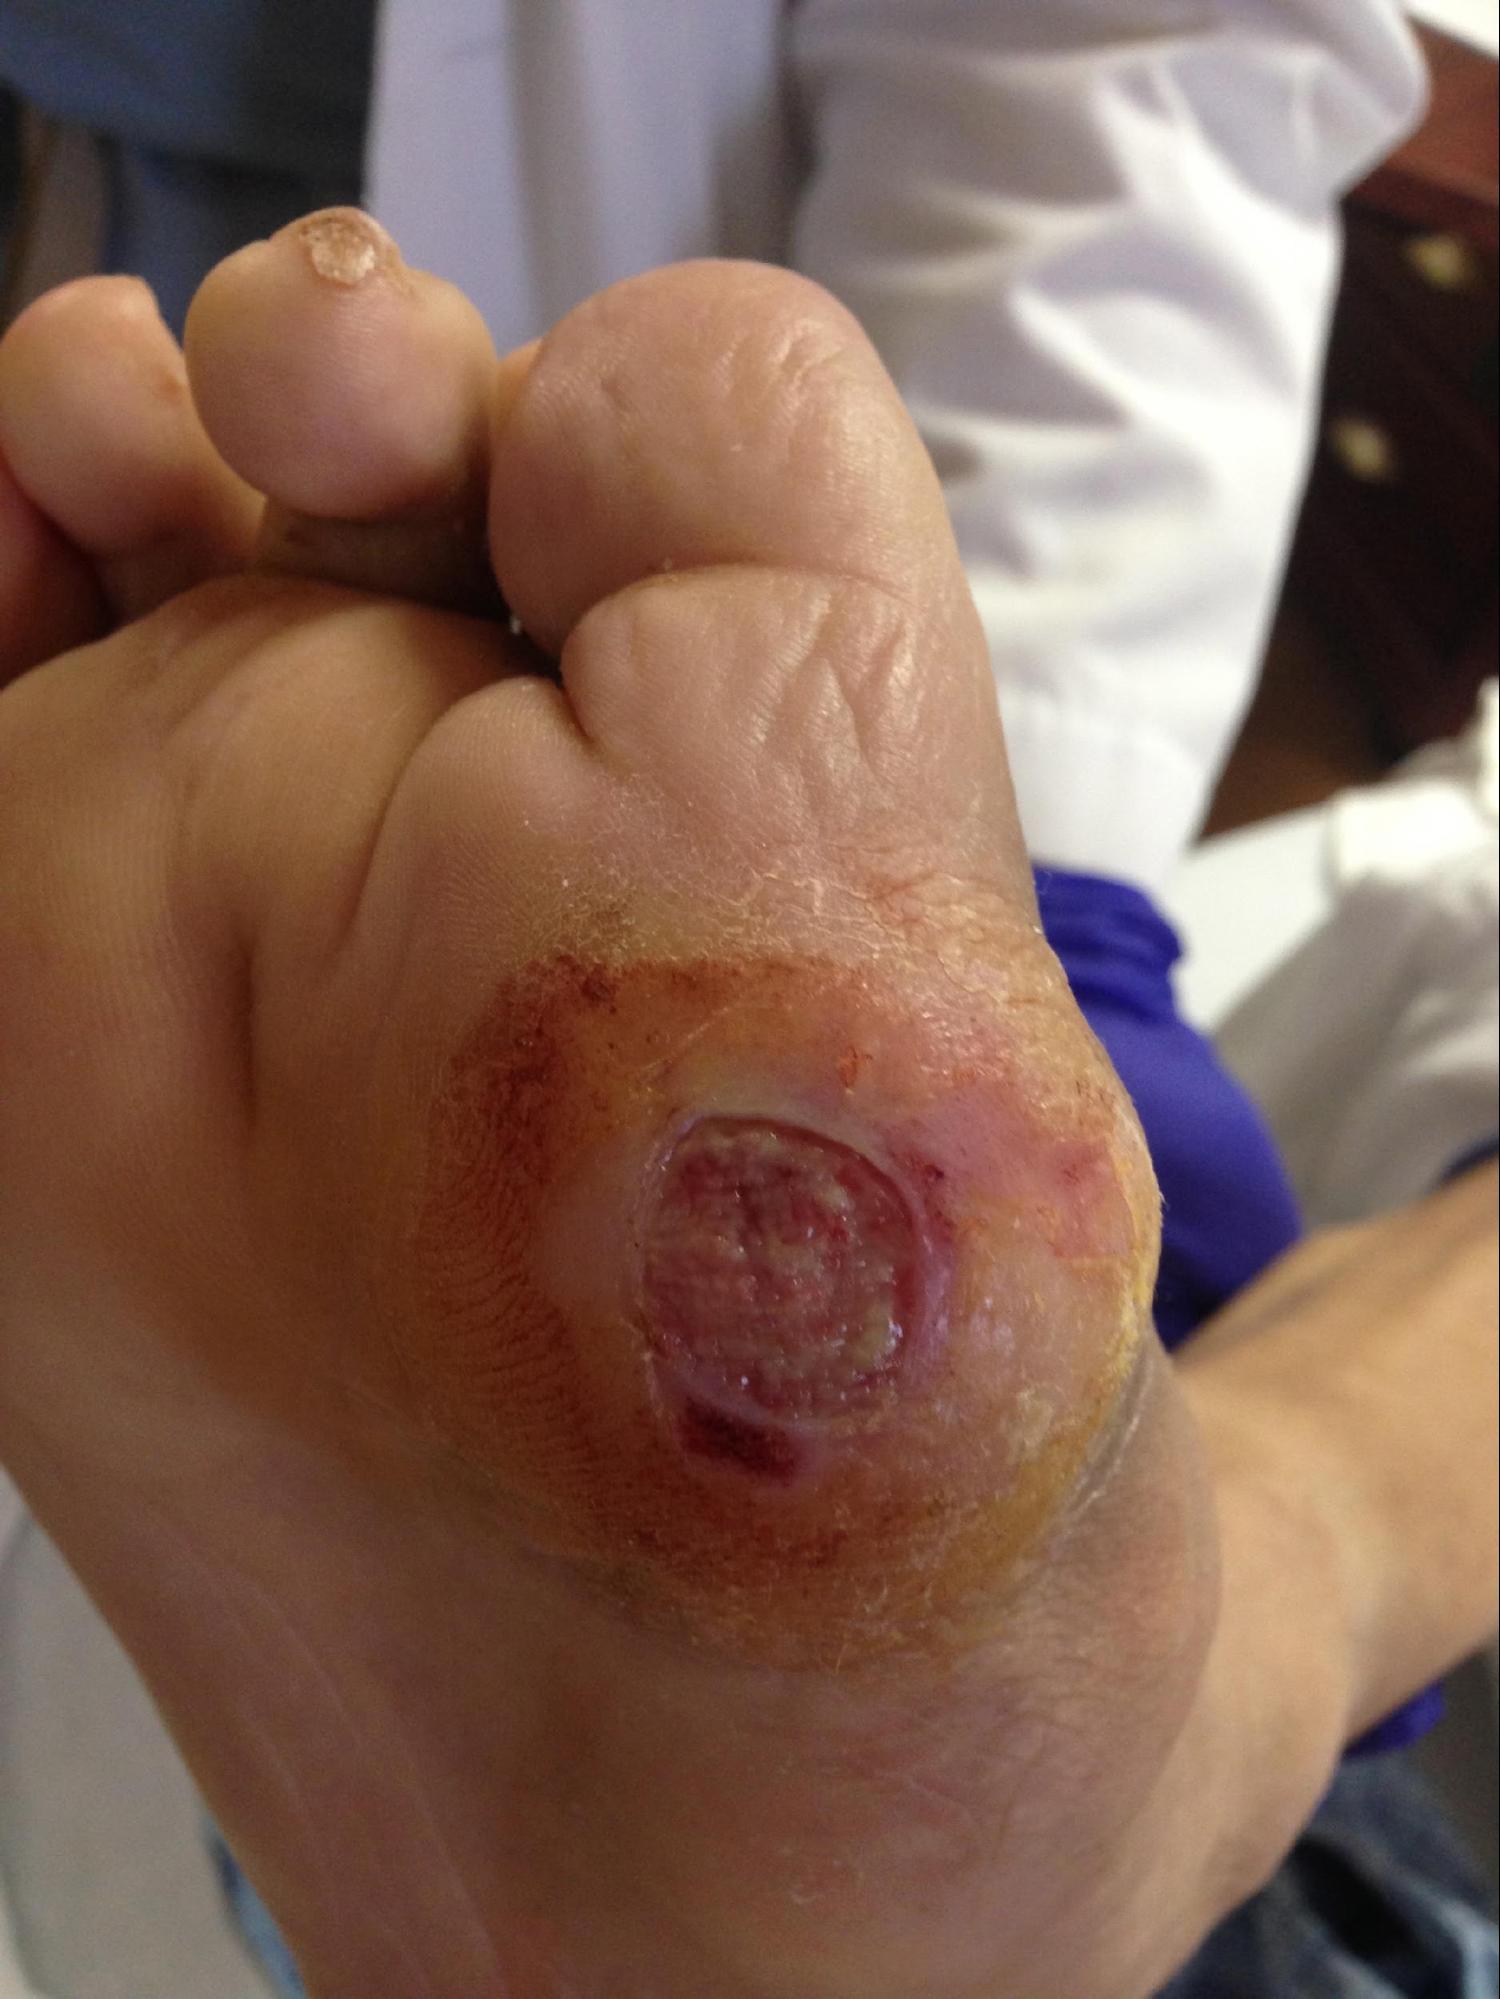 Diabetic Ulcer
Due to neuropathy, vasculopathy, and foot deformity. 
Note periwound callous formation. Wagner Grade 2